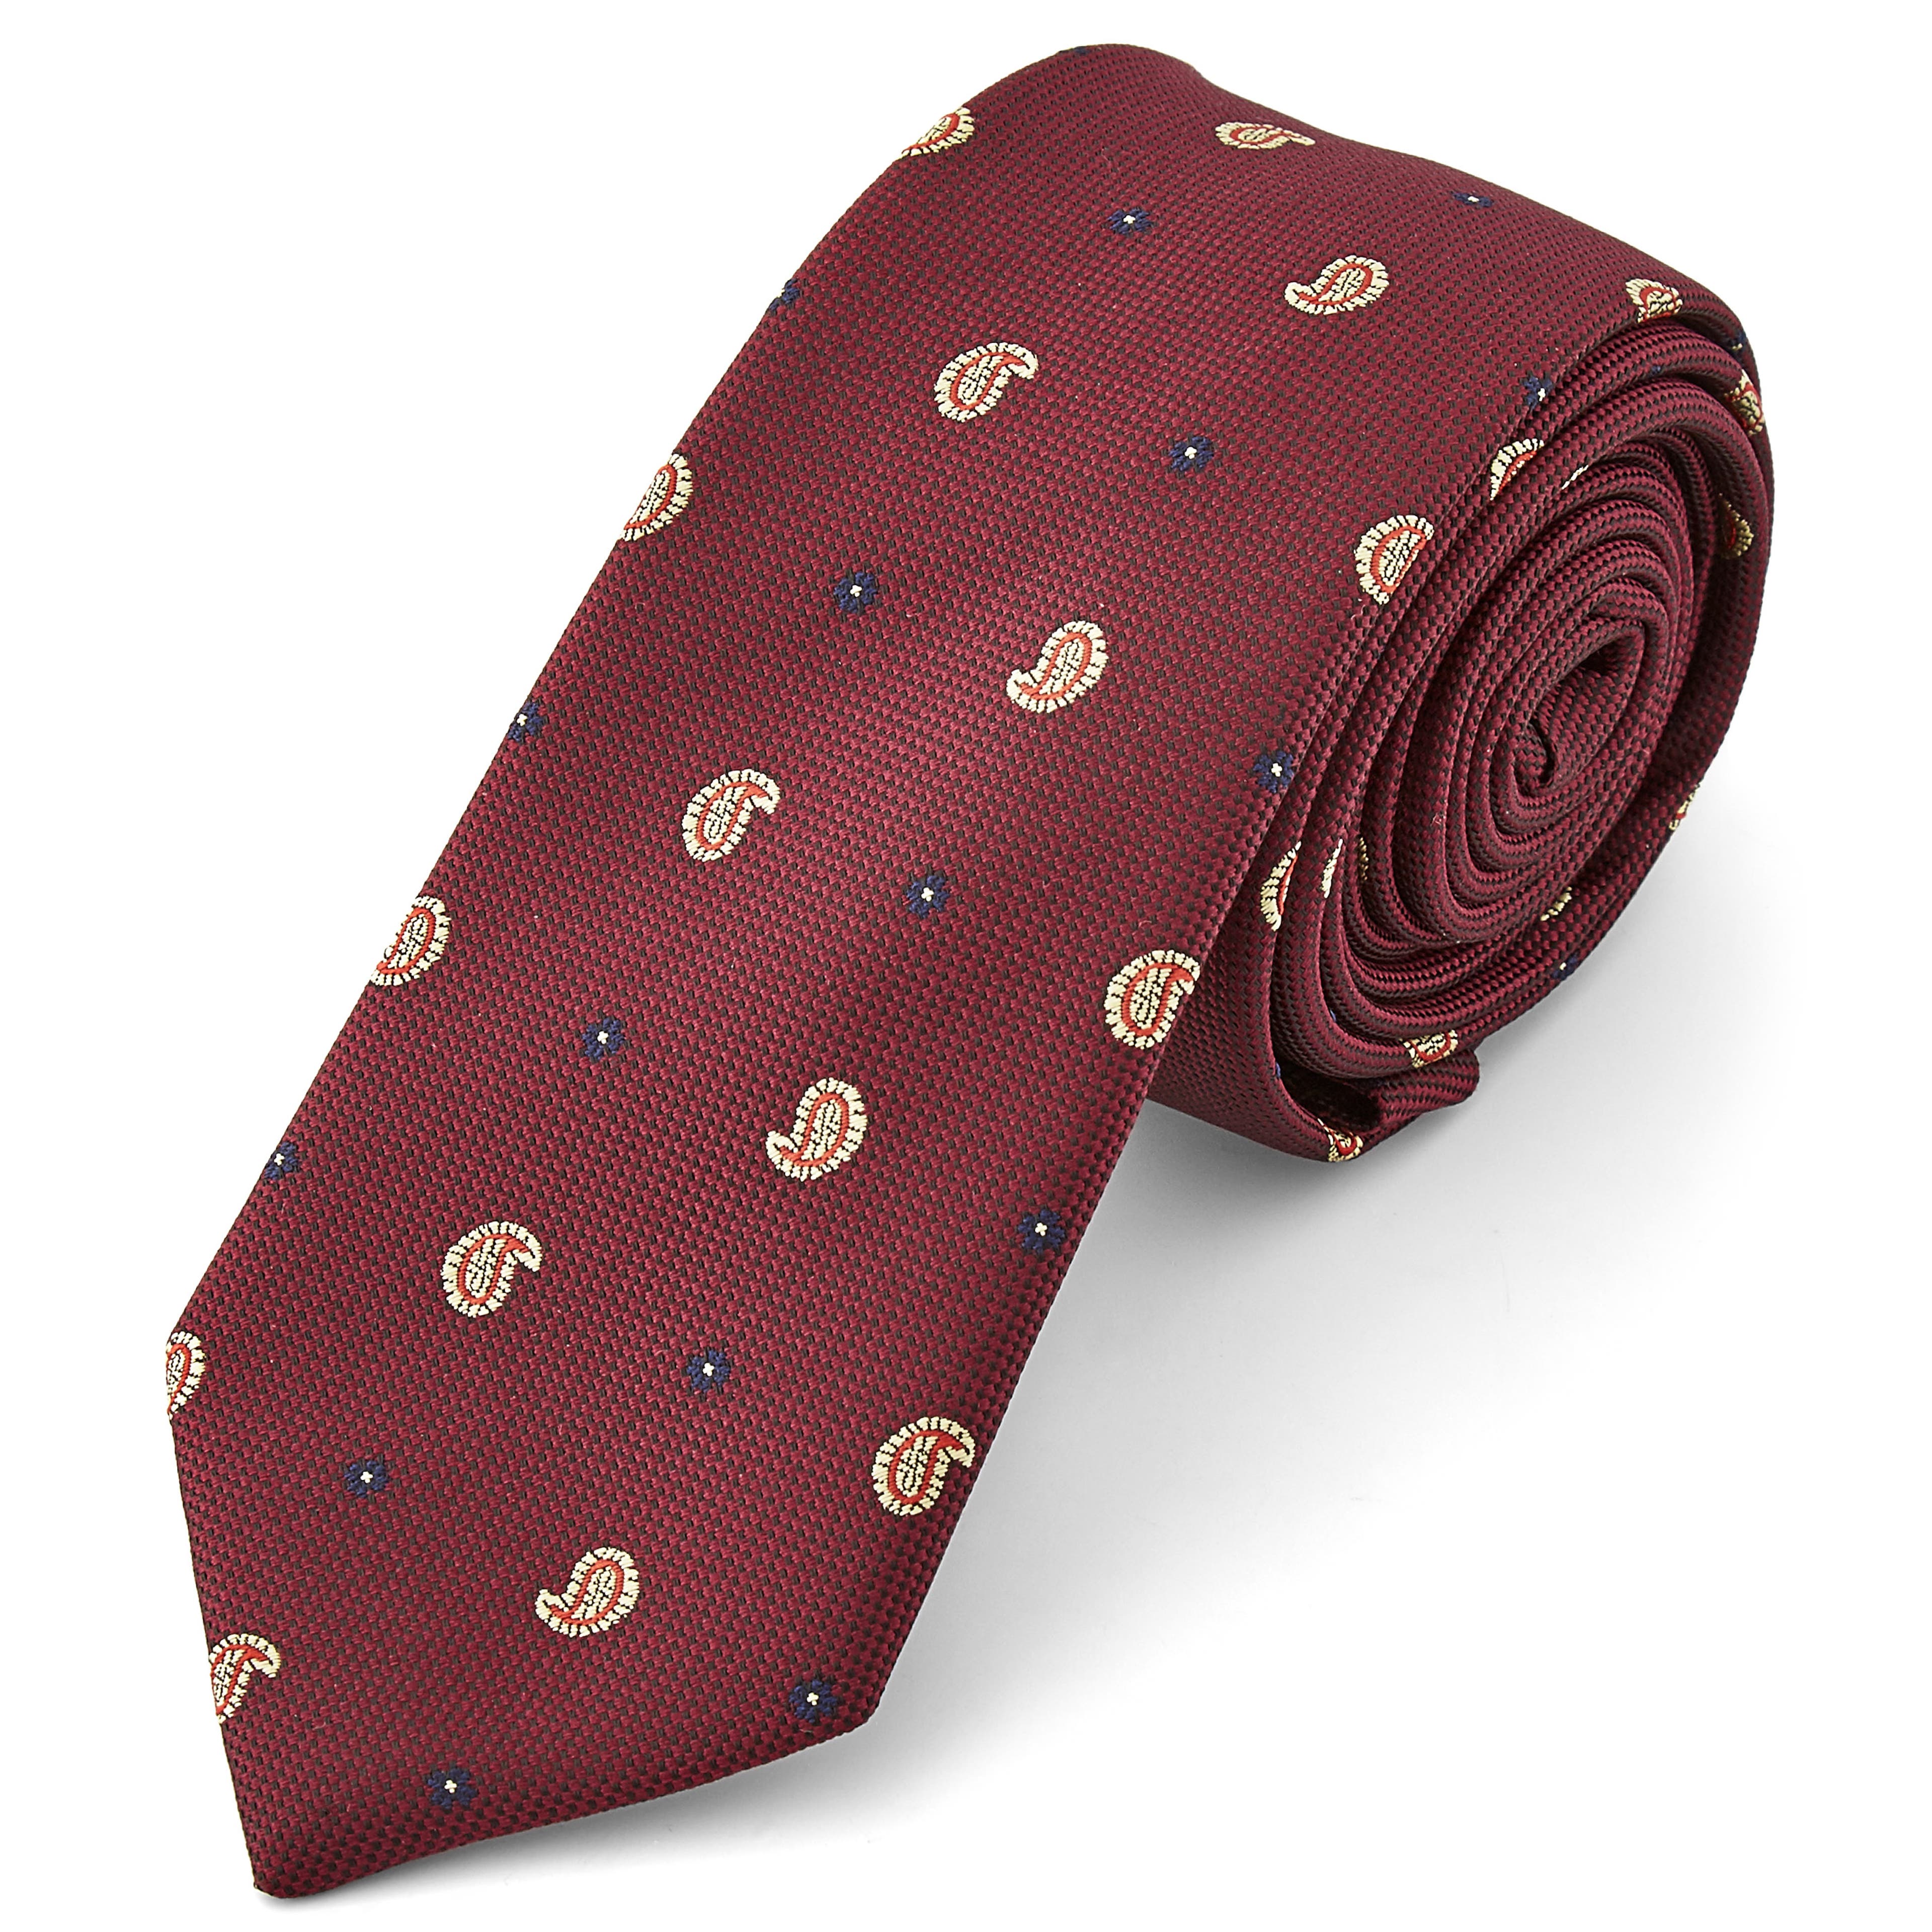 Burgundy Comma Patterned Tie